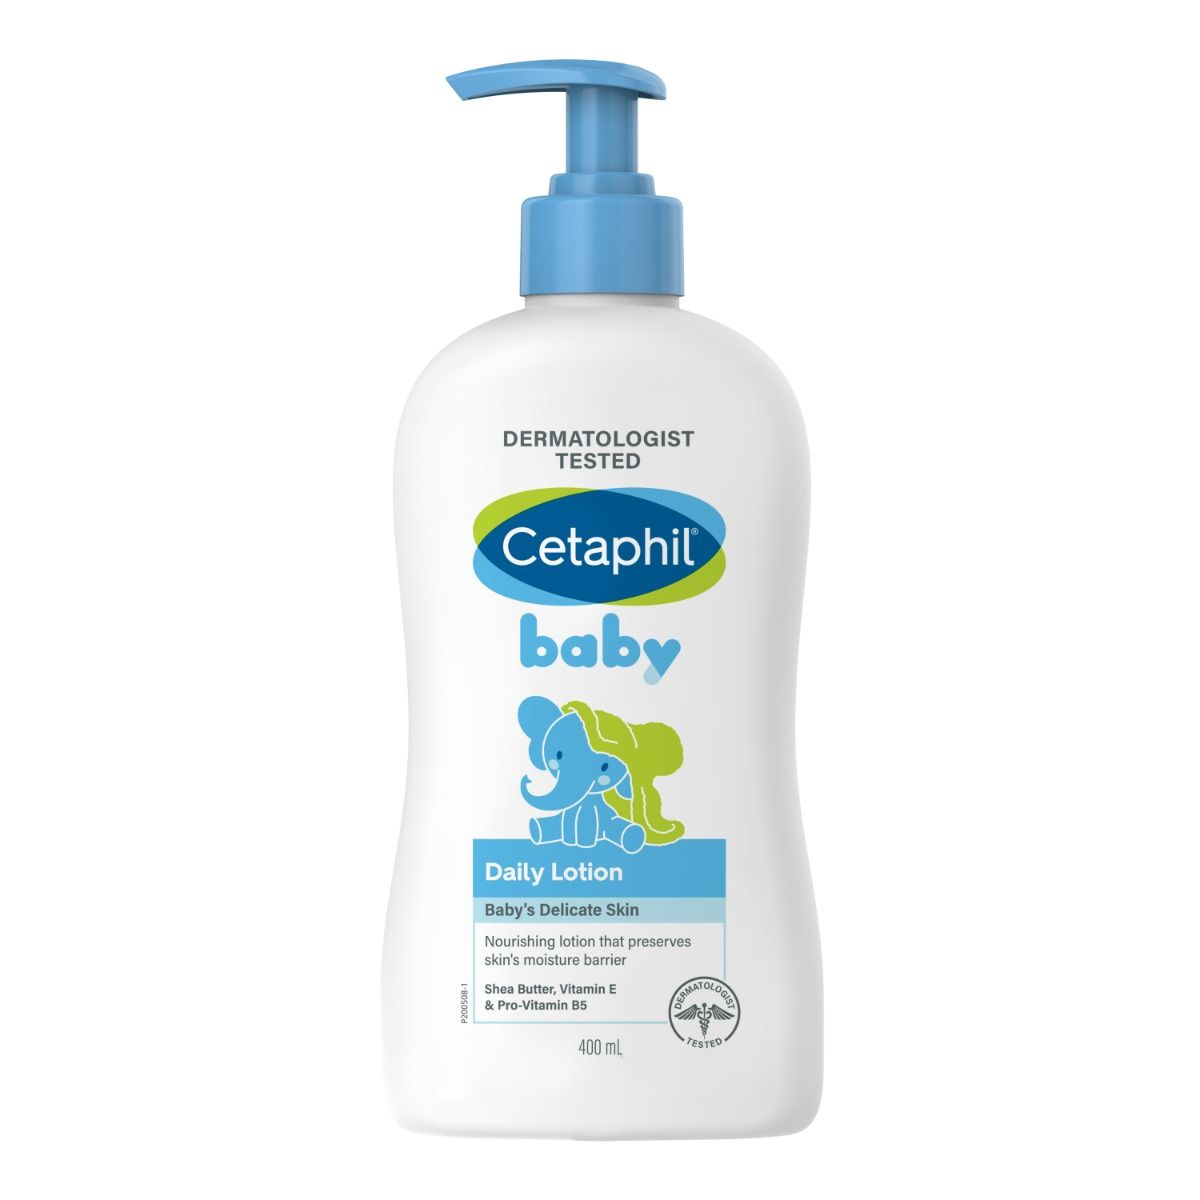 Cetaphil Baby Daily lotion, 400 ml, Pack of 1 